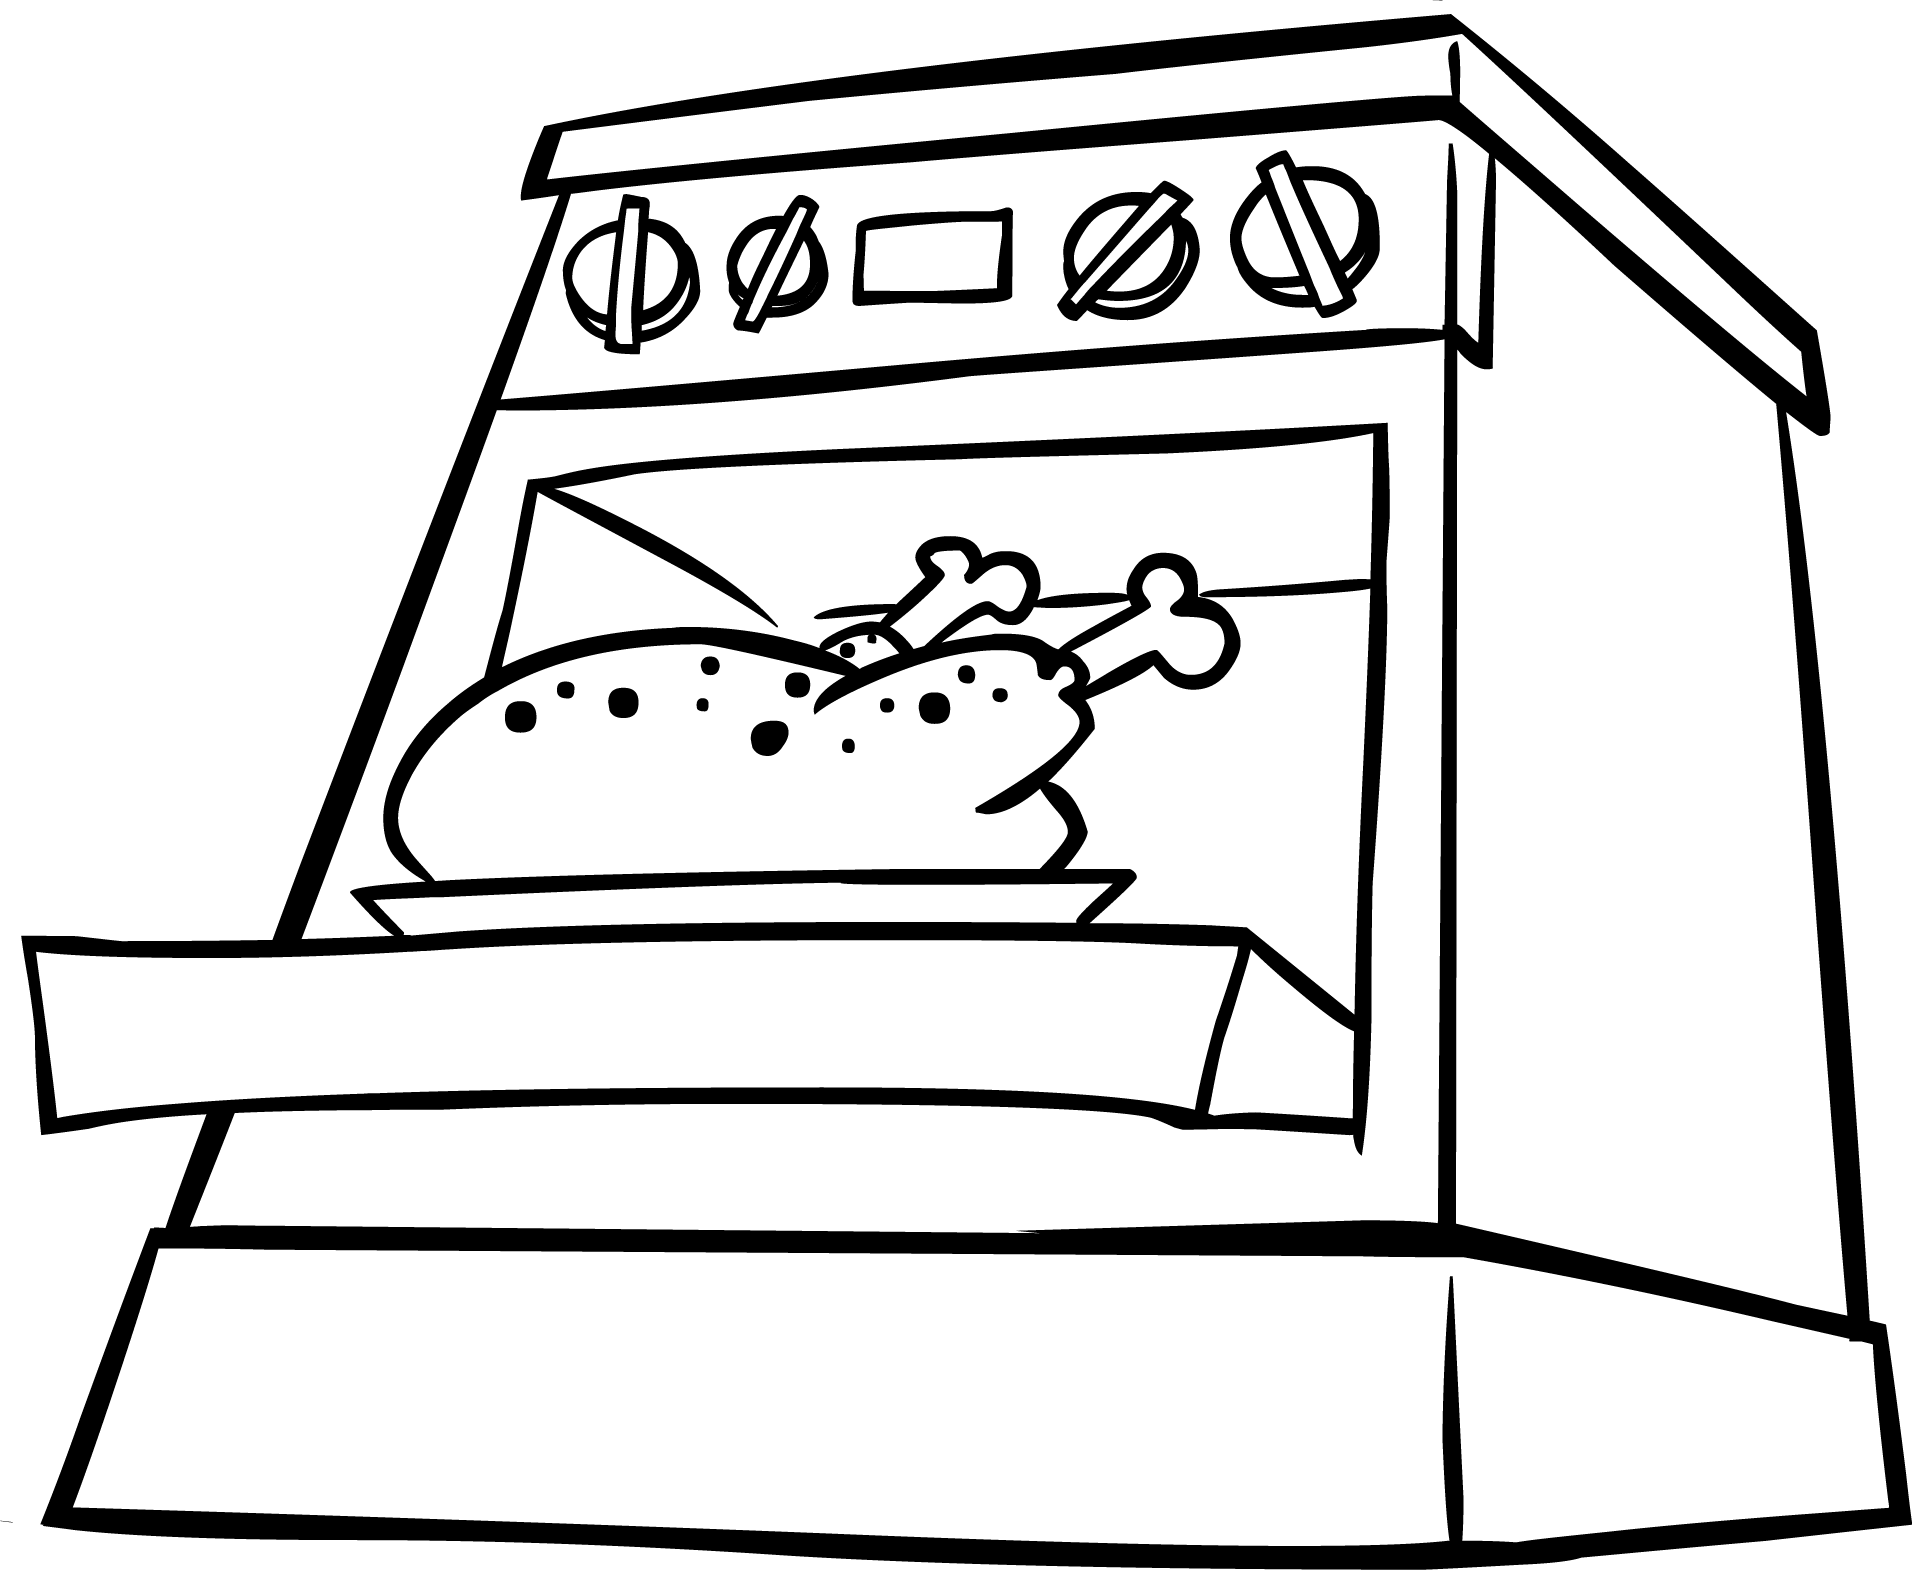 Oven clipart black and white. Open free download best